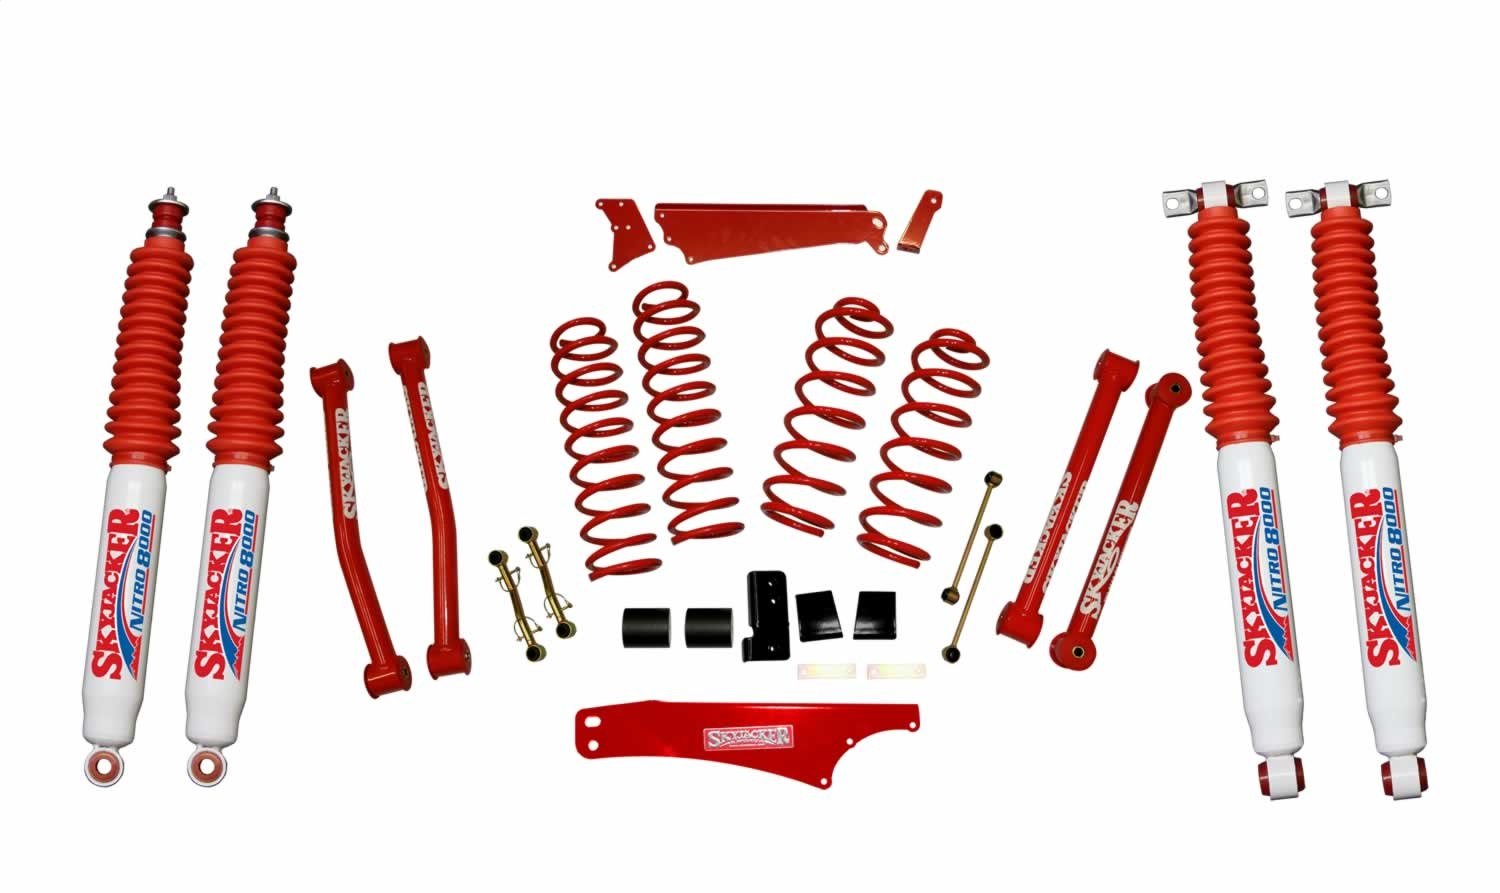 JK401KCR-N Front and Rear Suspension Lift Kit, Lift Amount: 4-5 in. Front/4-5 in. Rear